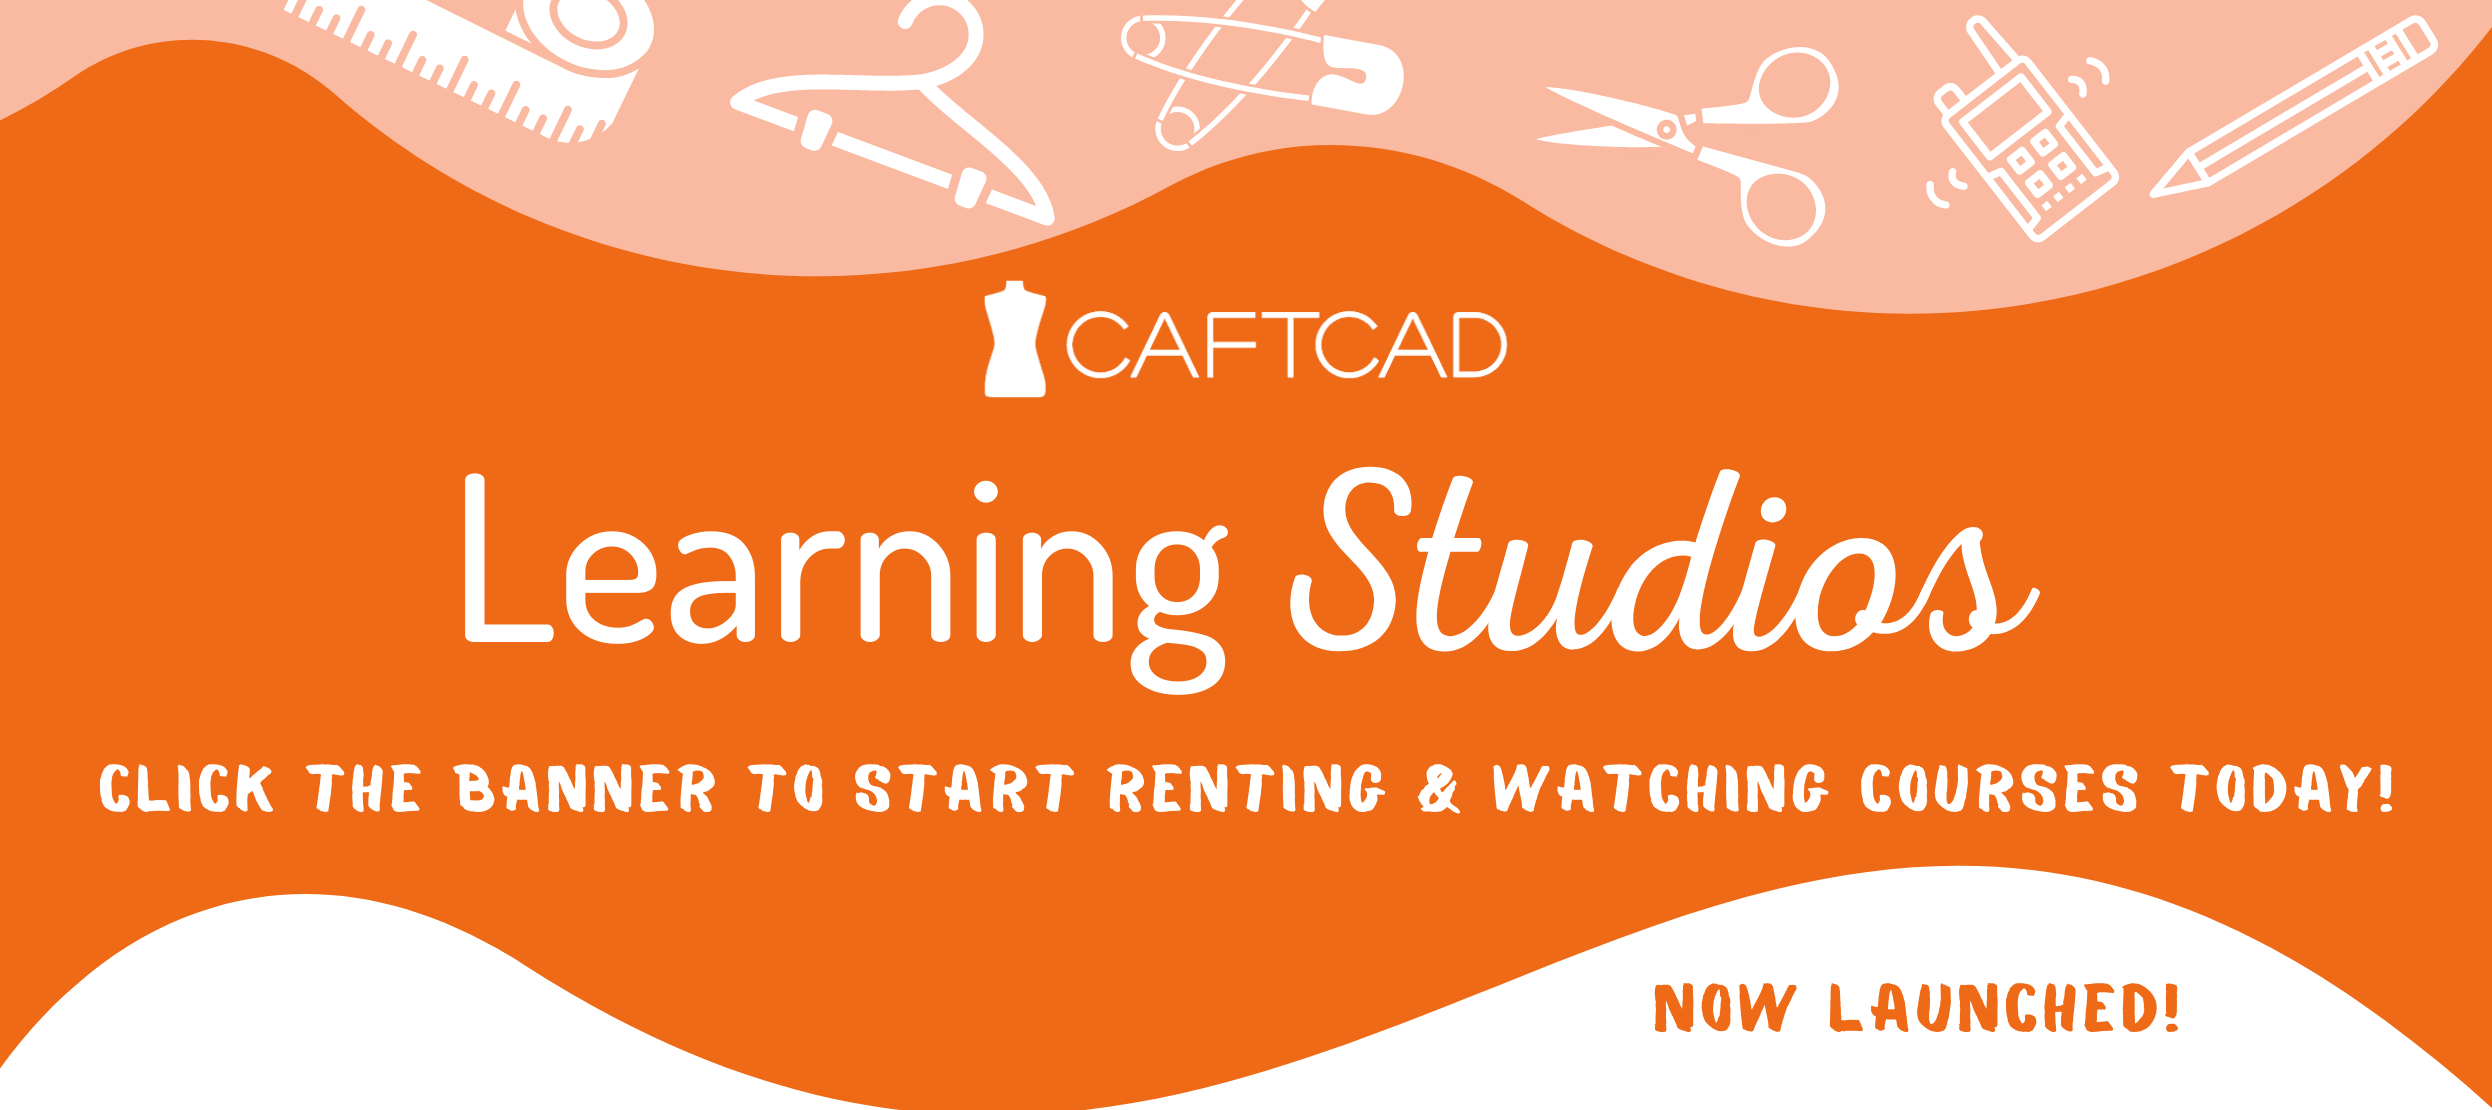 CAFTCAD Learning Studios Web Banner.png